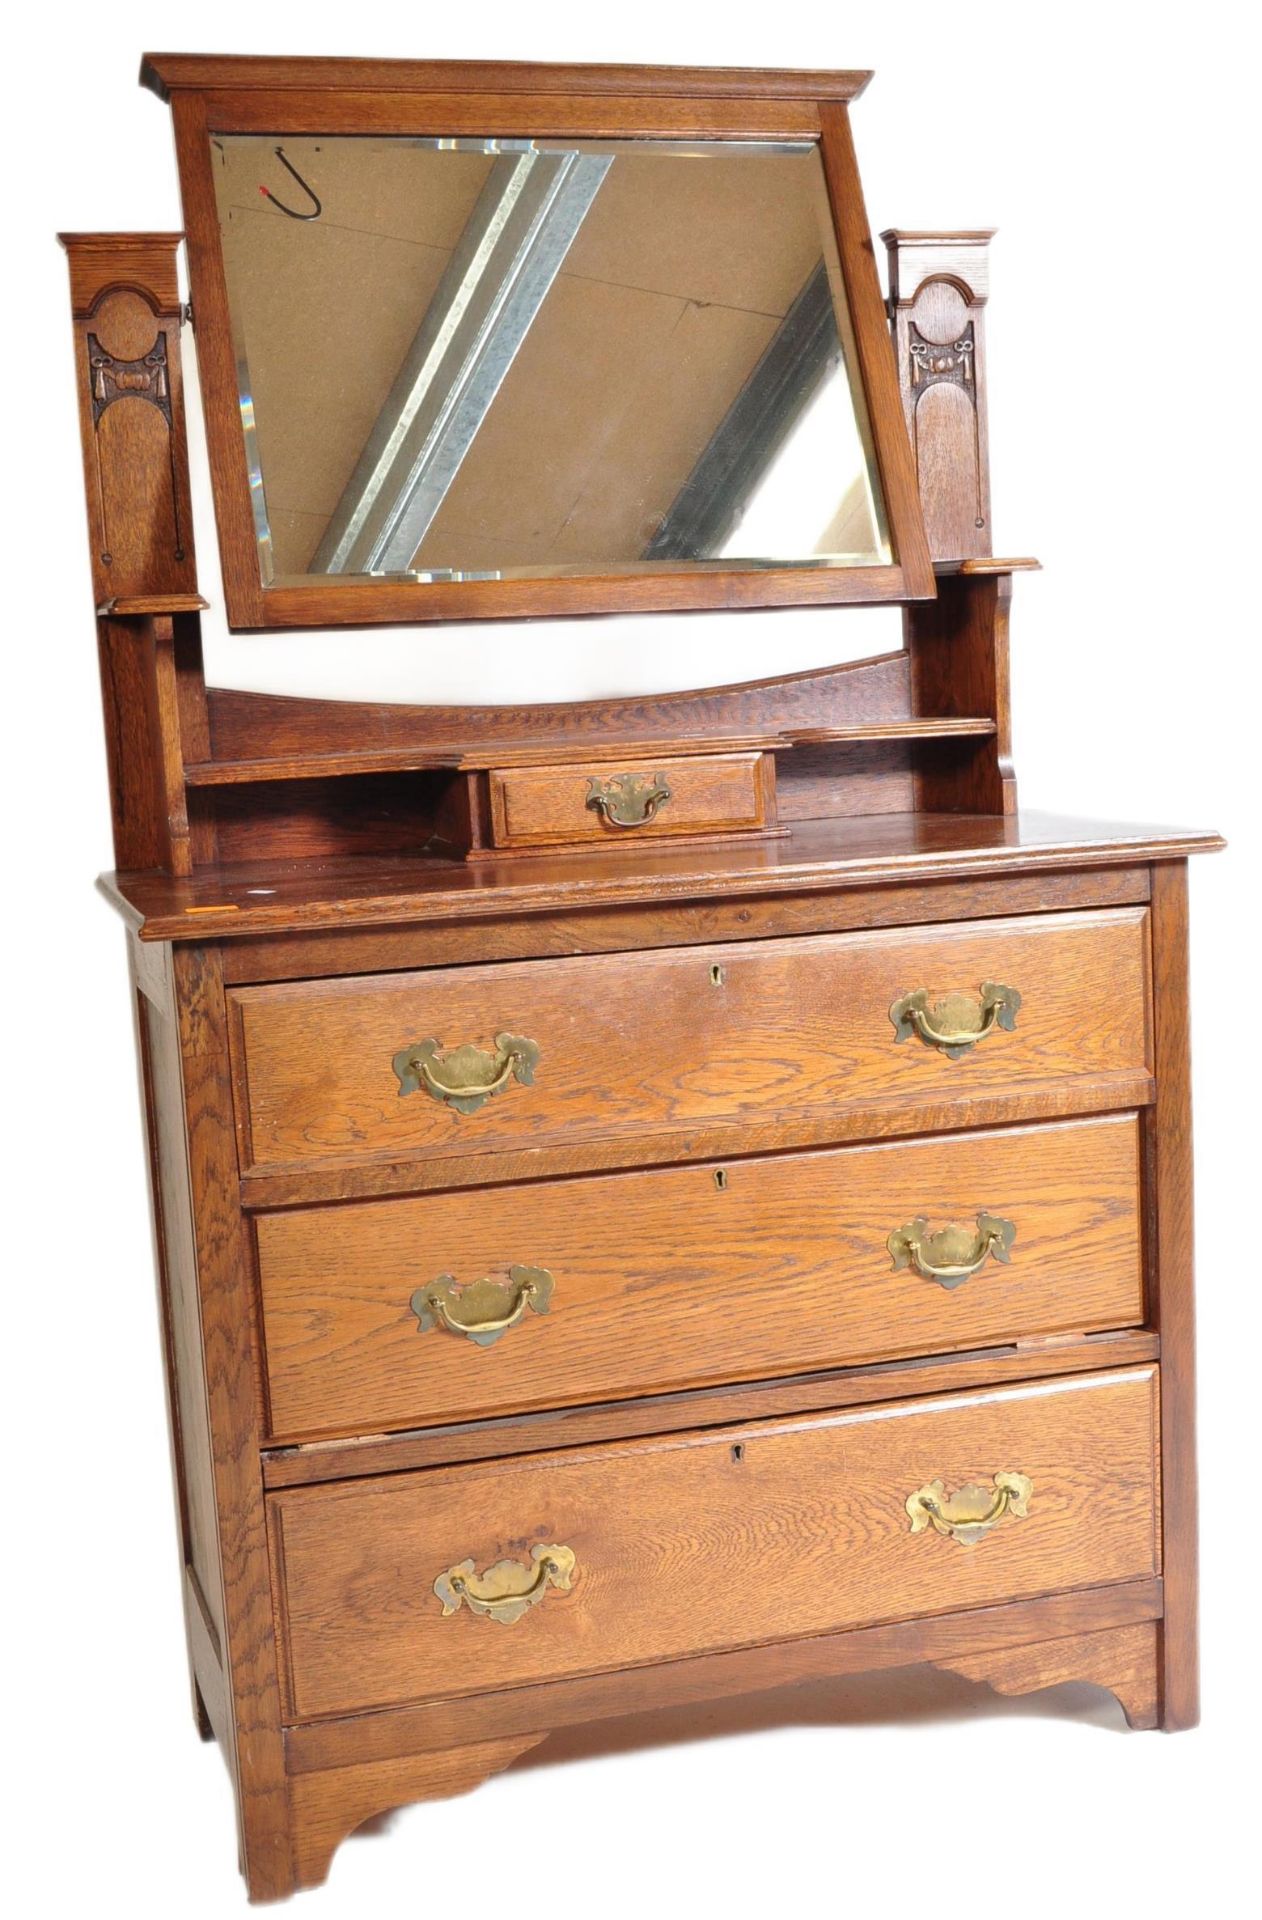 EARLY 20TH CENTURY EDWARDIAN ARTS & CRAFT DRESSING TABLE